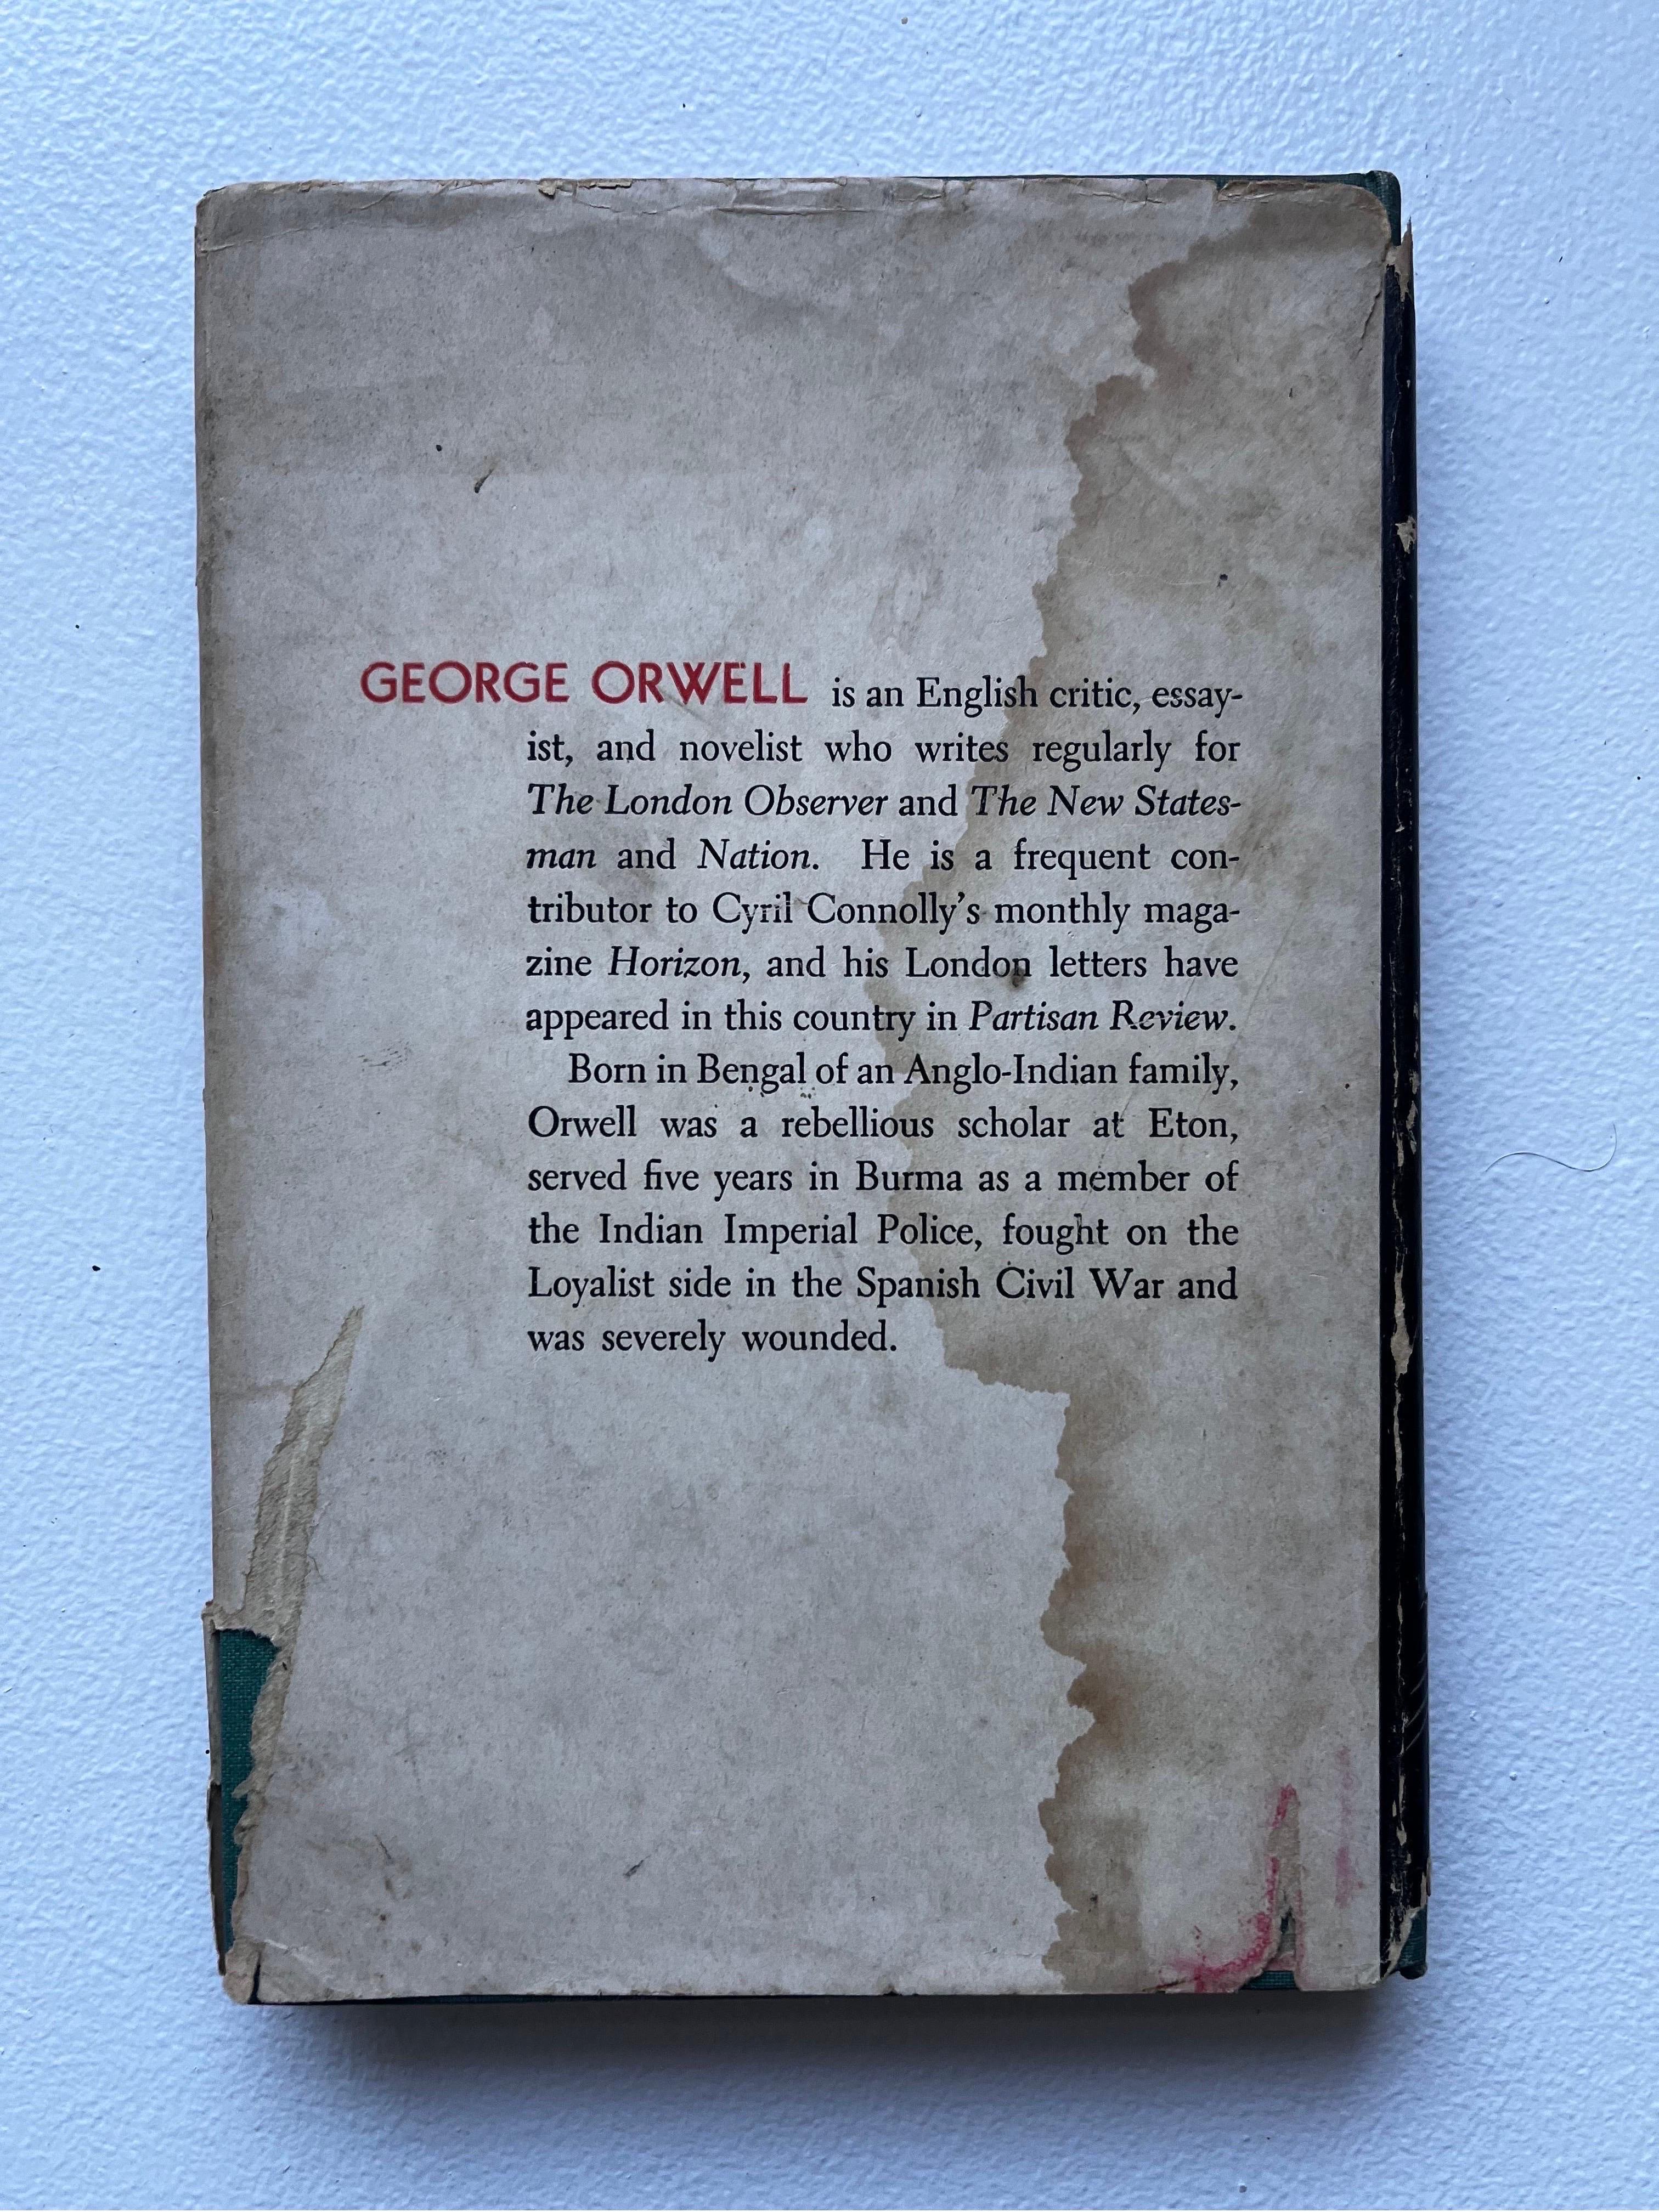 Animal Farm - George Orwell - First US Edition- 1946 - hardcover
it's a classic - more important now than ever

some water damage to dust cover / some damage to book 
The book is in generally good condition

